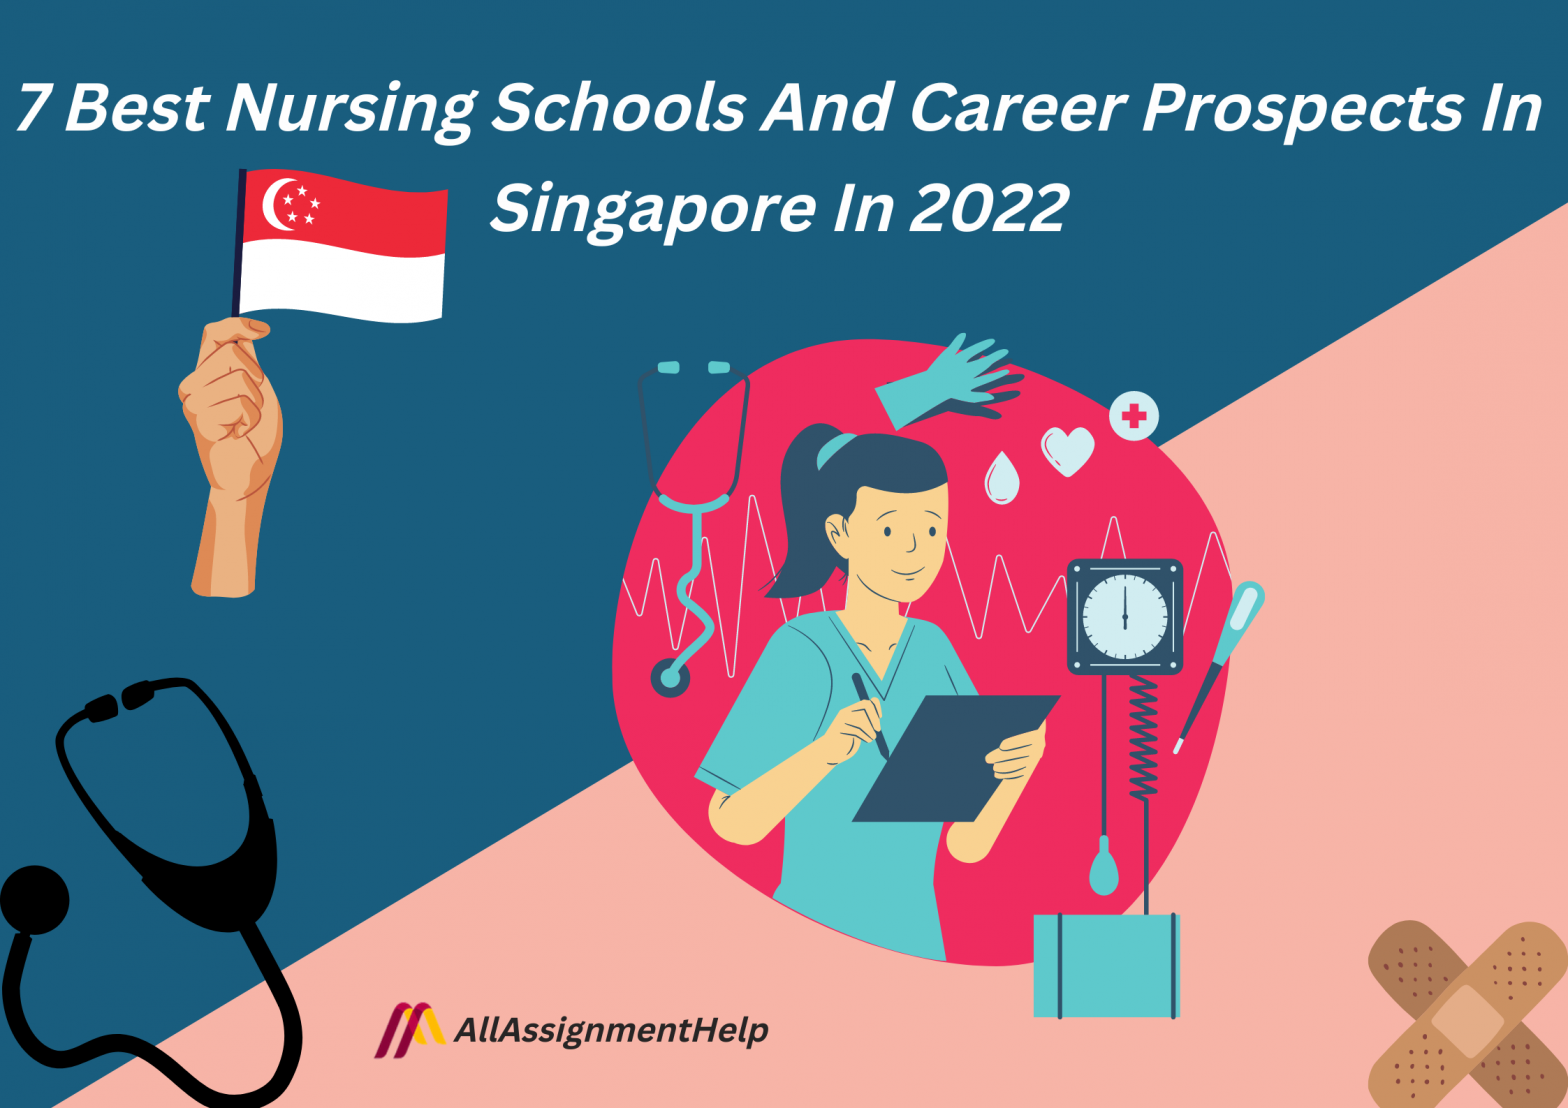 7 Best Nursing Schools And Career Prospects In Singapore In 2022